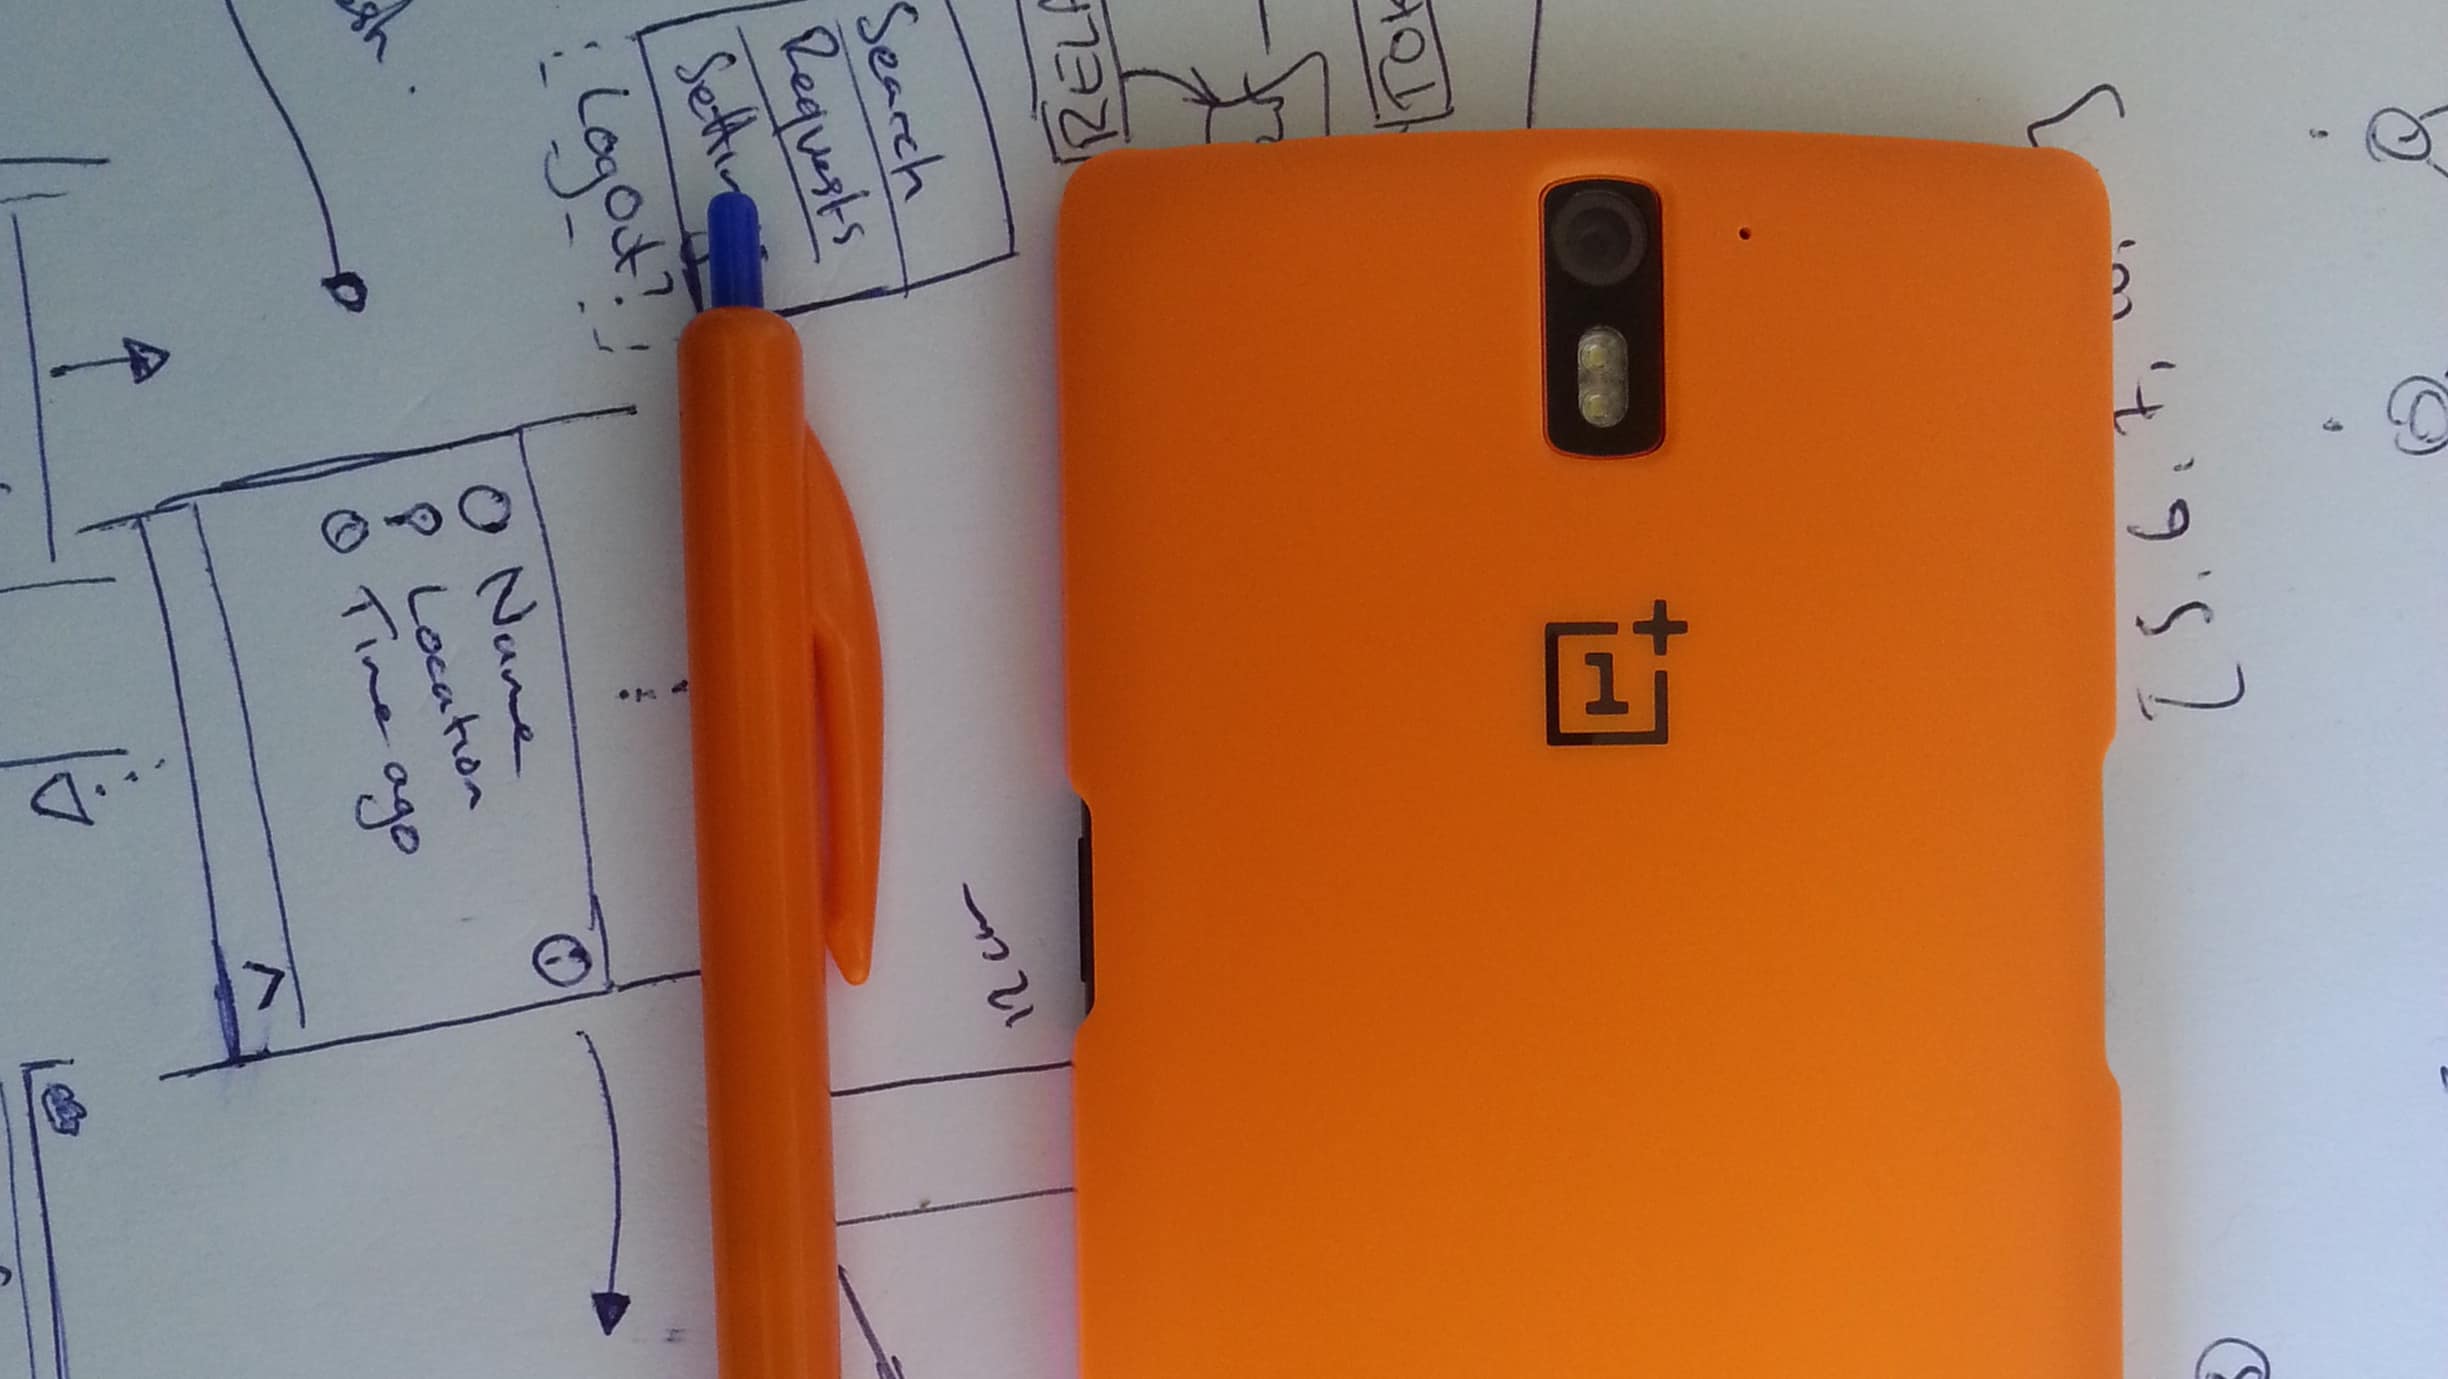 The OnePlus One